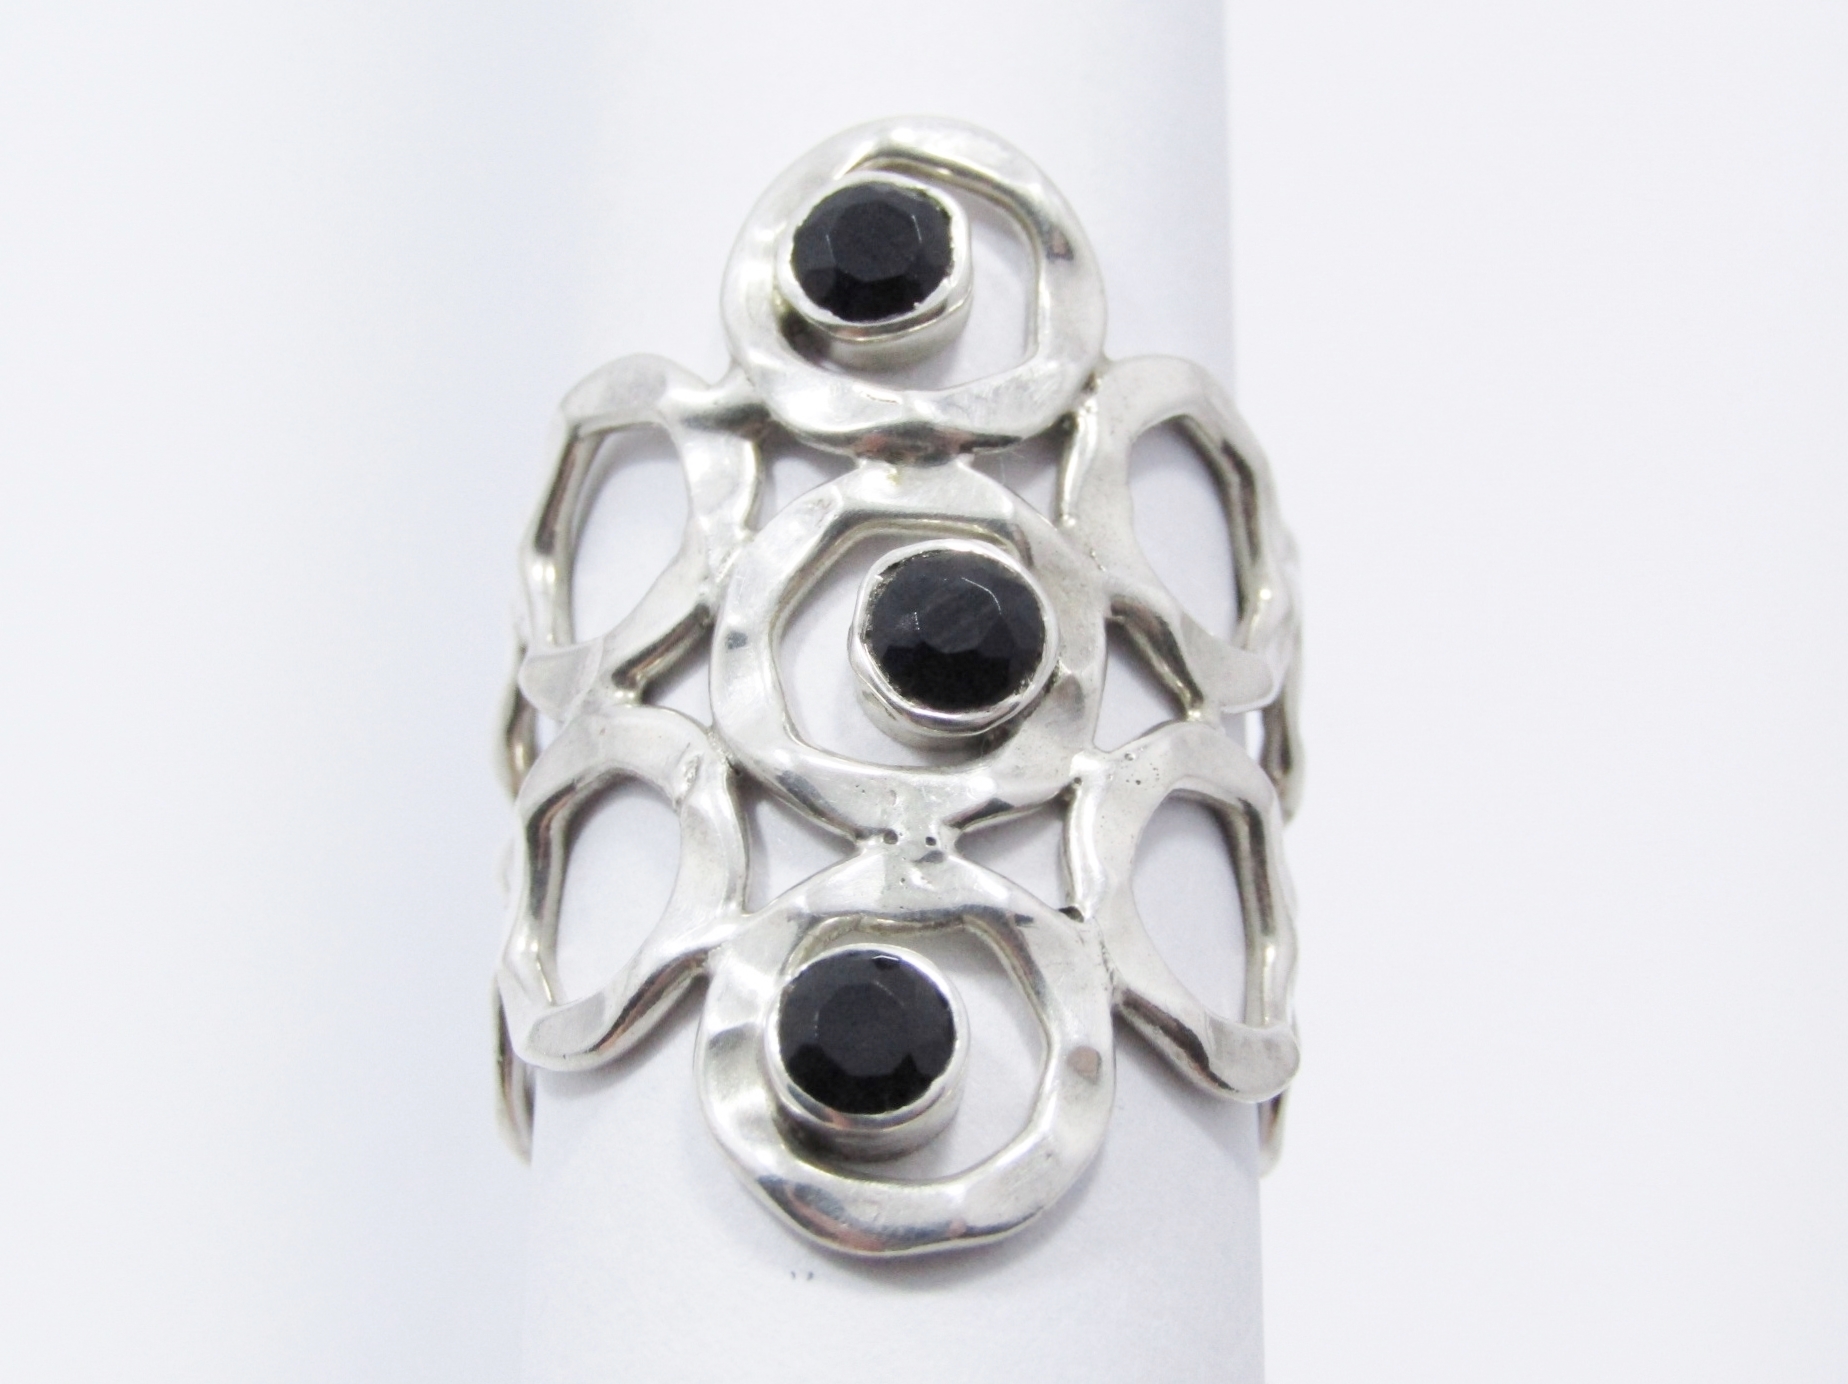 A Stunning Broad Black Zirconia Stone Ring With a Open Ended Band in Sterling Silver